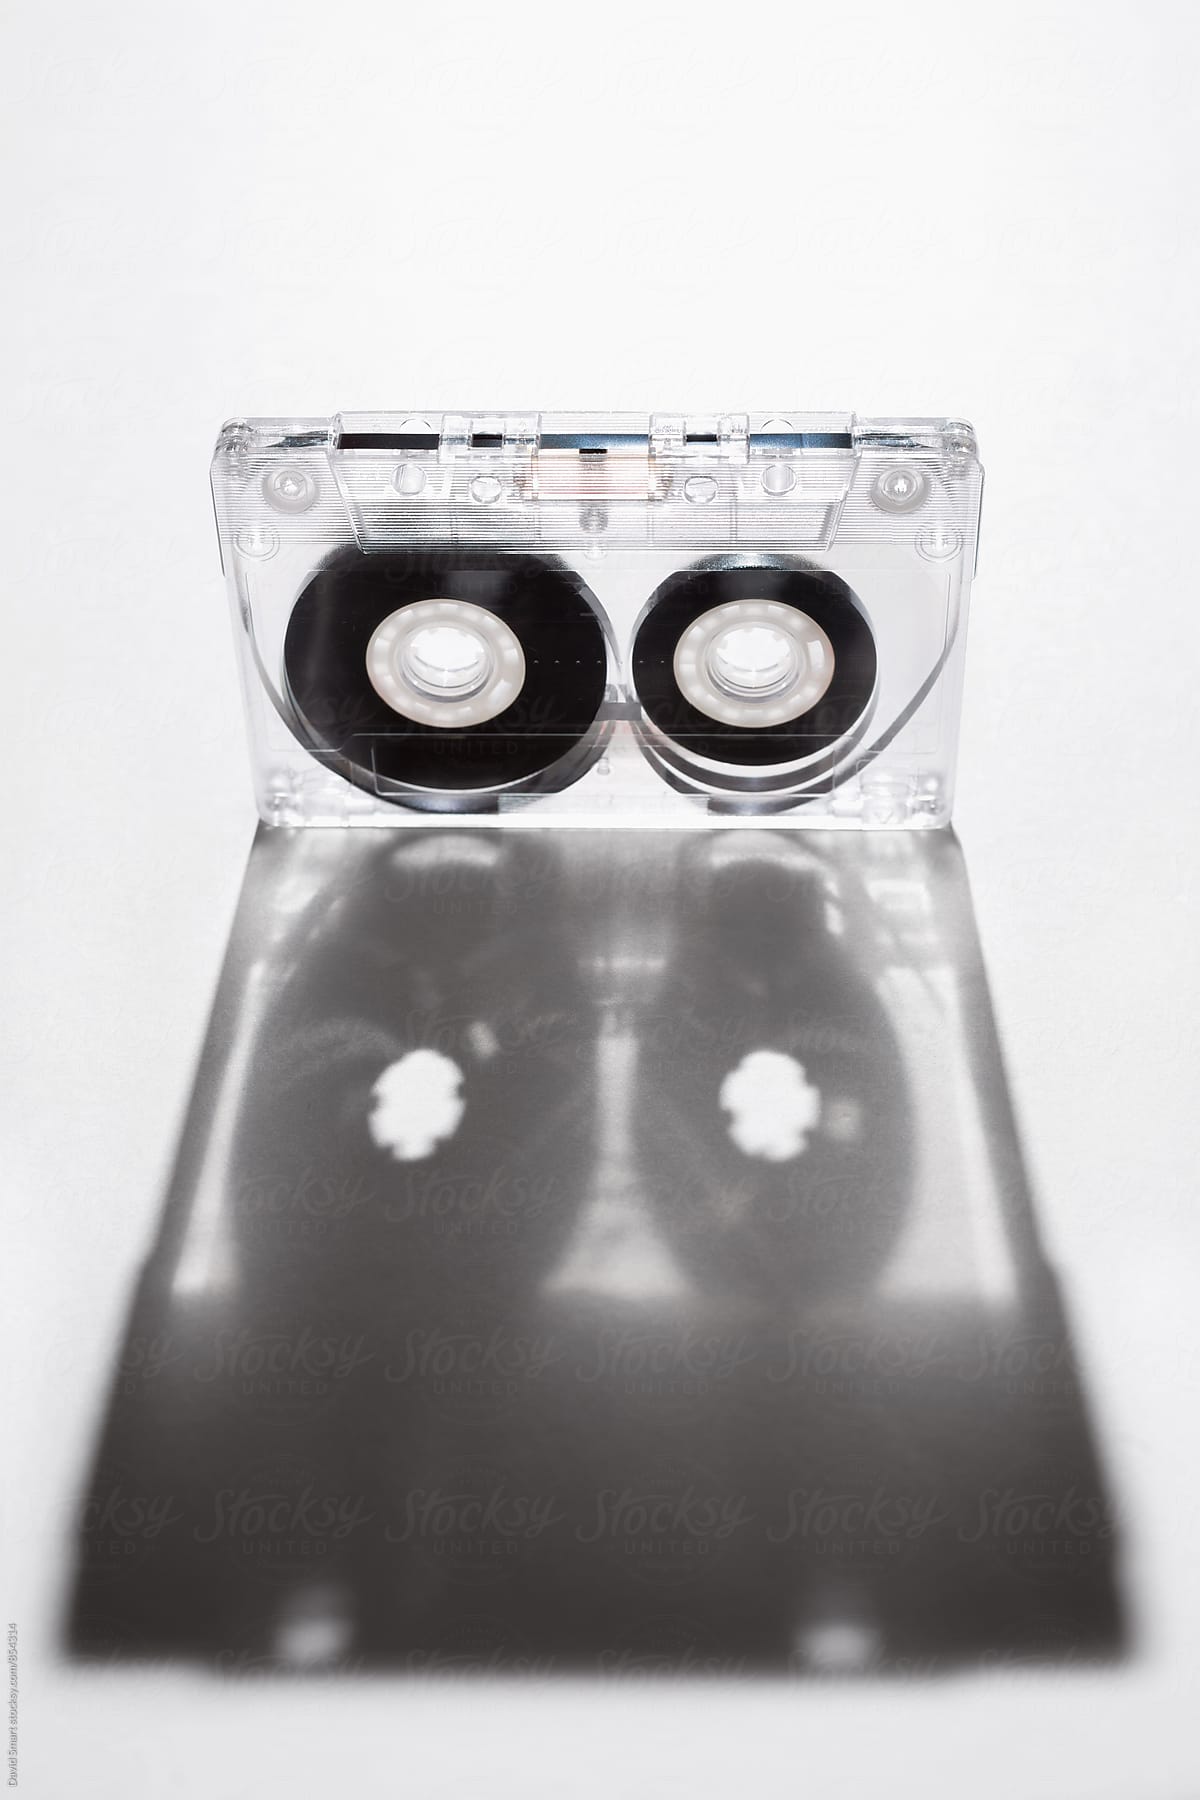 Shadow of cassette tape made of clear plastic